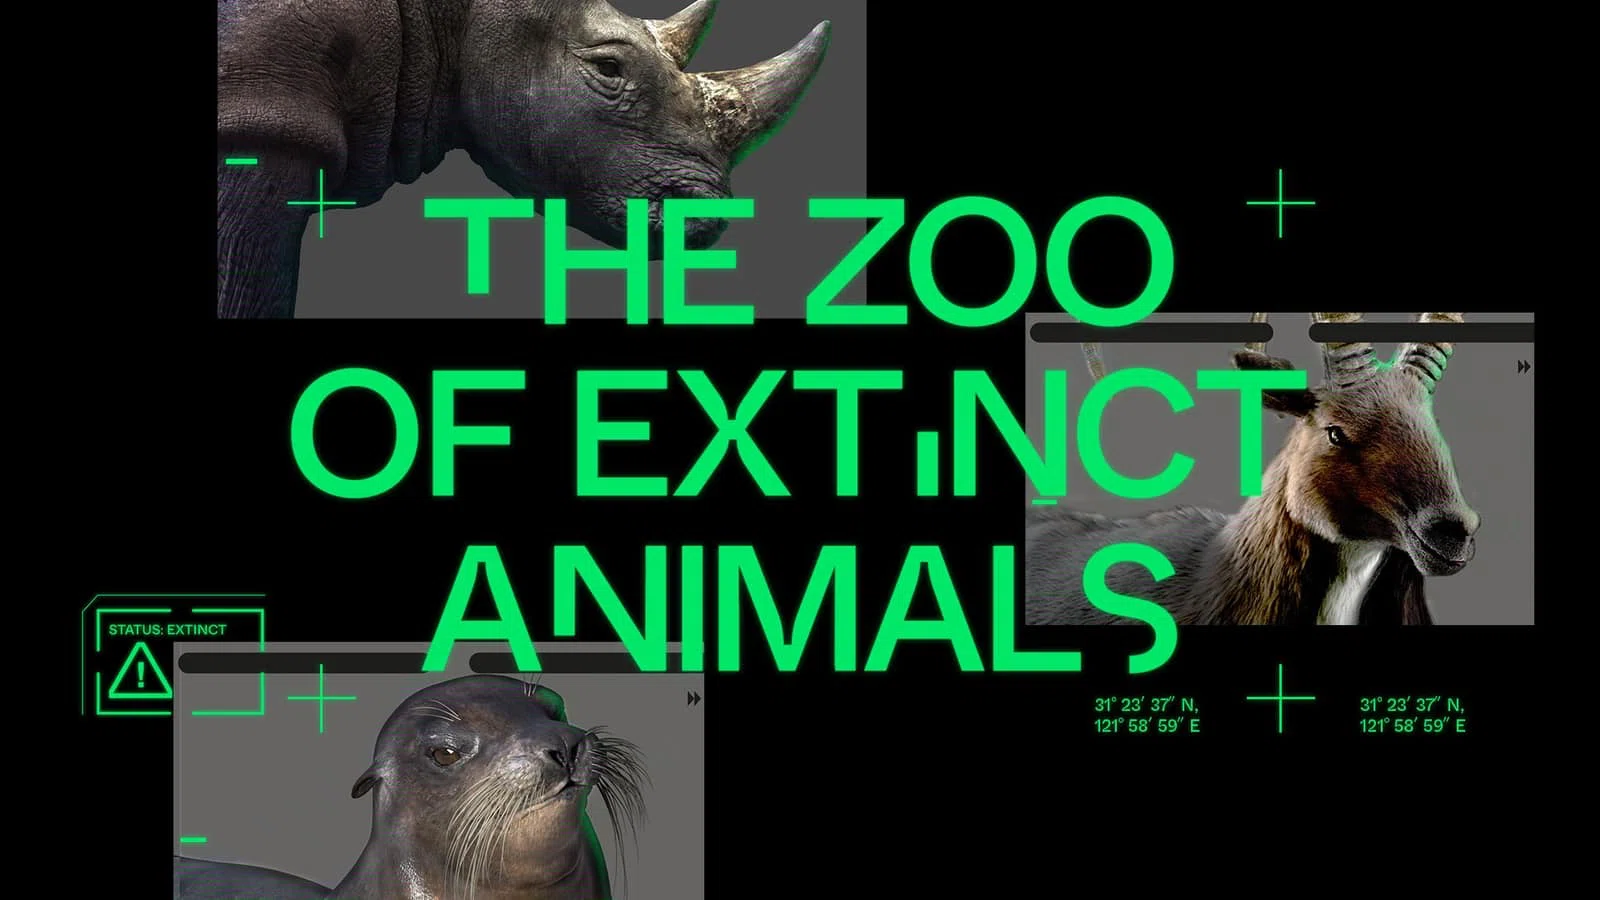 The Zoo of Extinct Animals is an AR experience allowing viewers to interact  with extinct wildlife